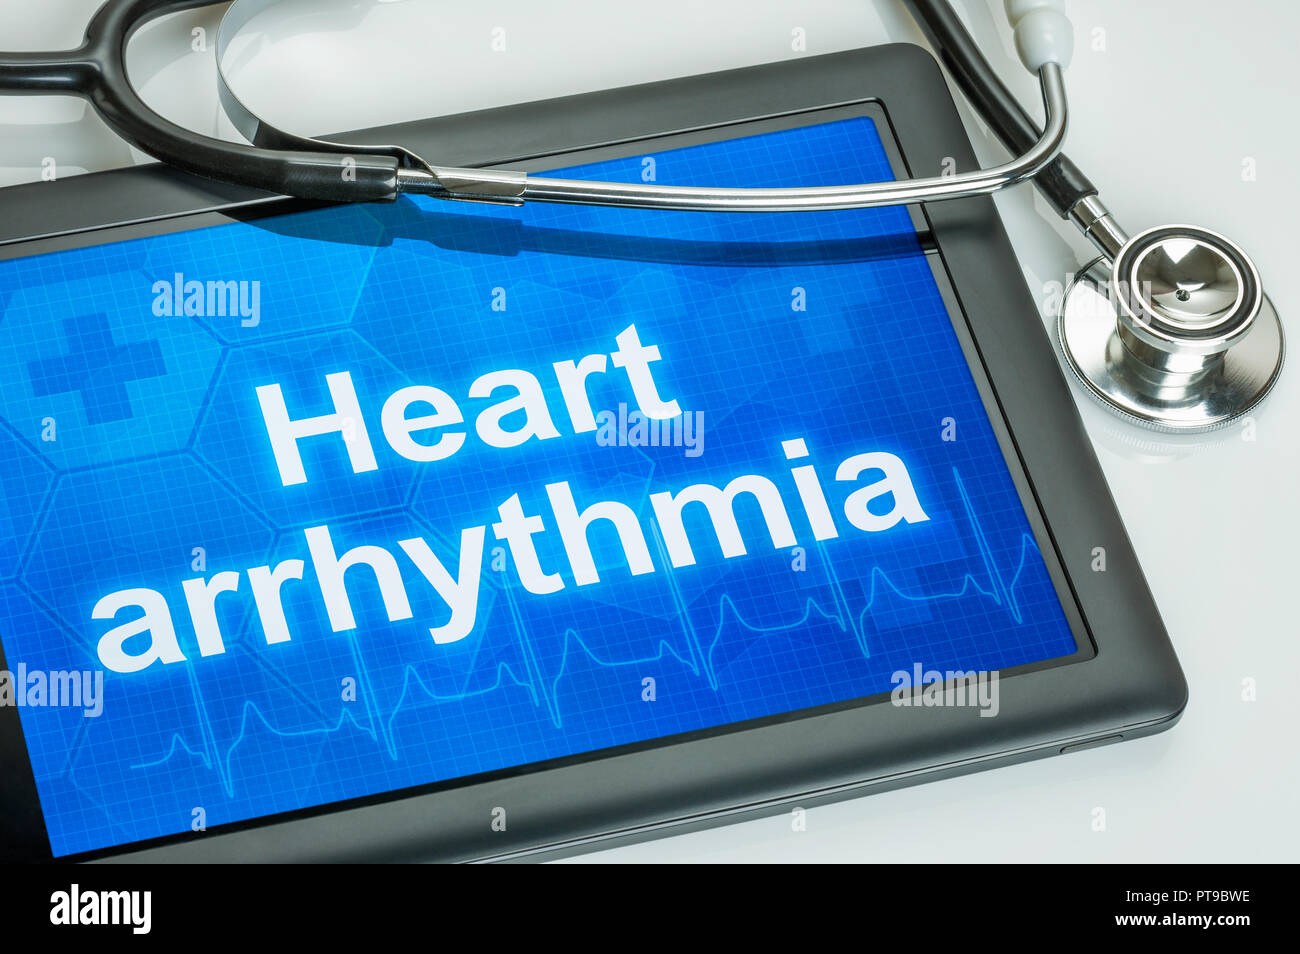 Tablet with the text Heart arrythmia the display Stock Photo